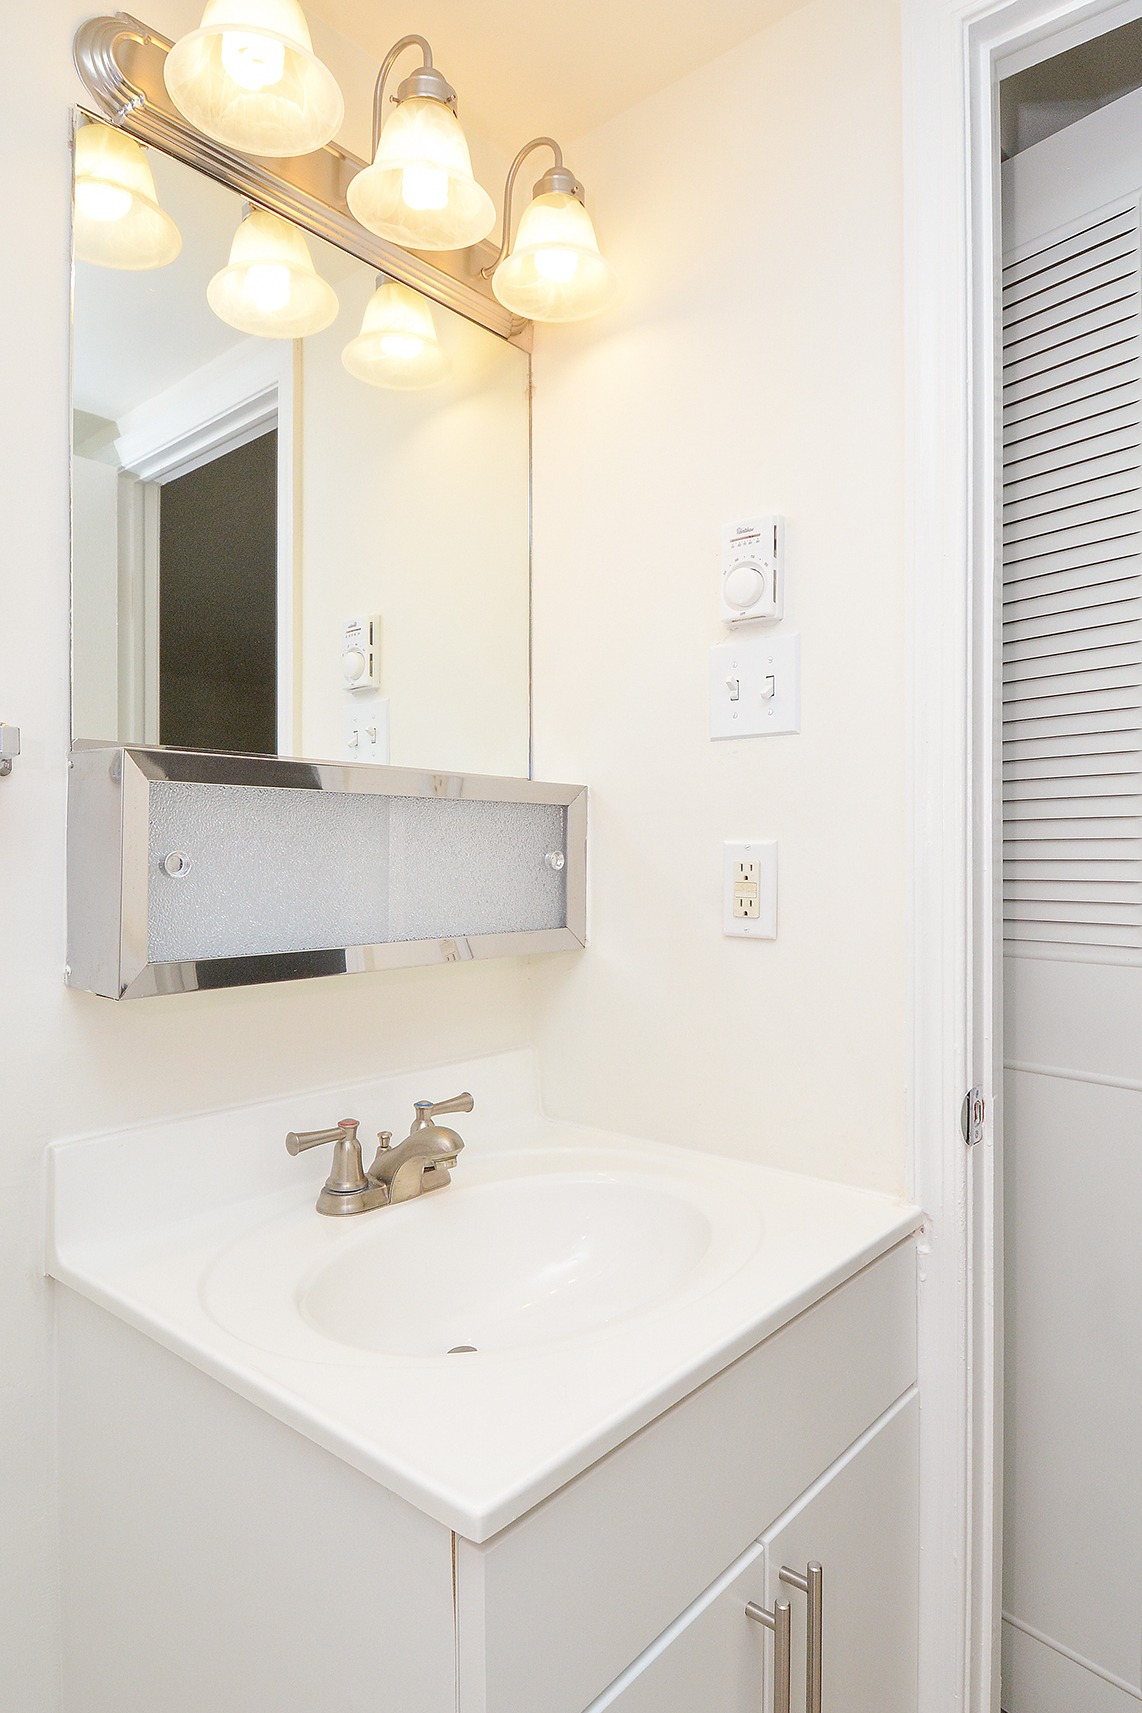 Sink with white cabinets, mirror, and 3 lights above the mirror in a bathroom.